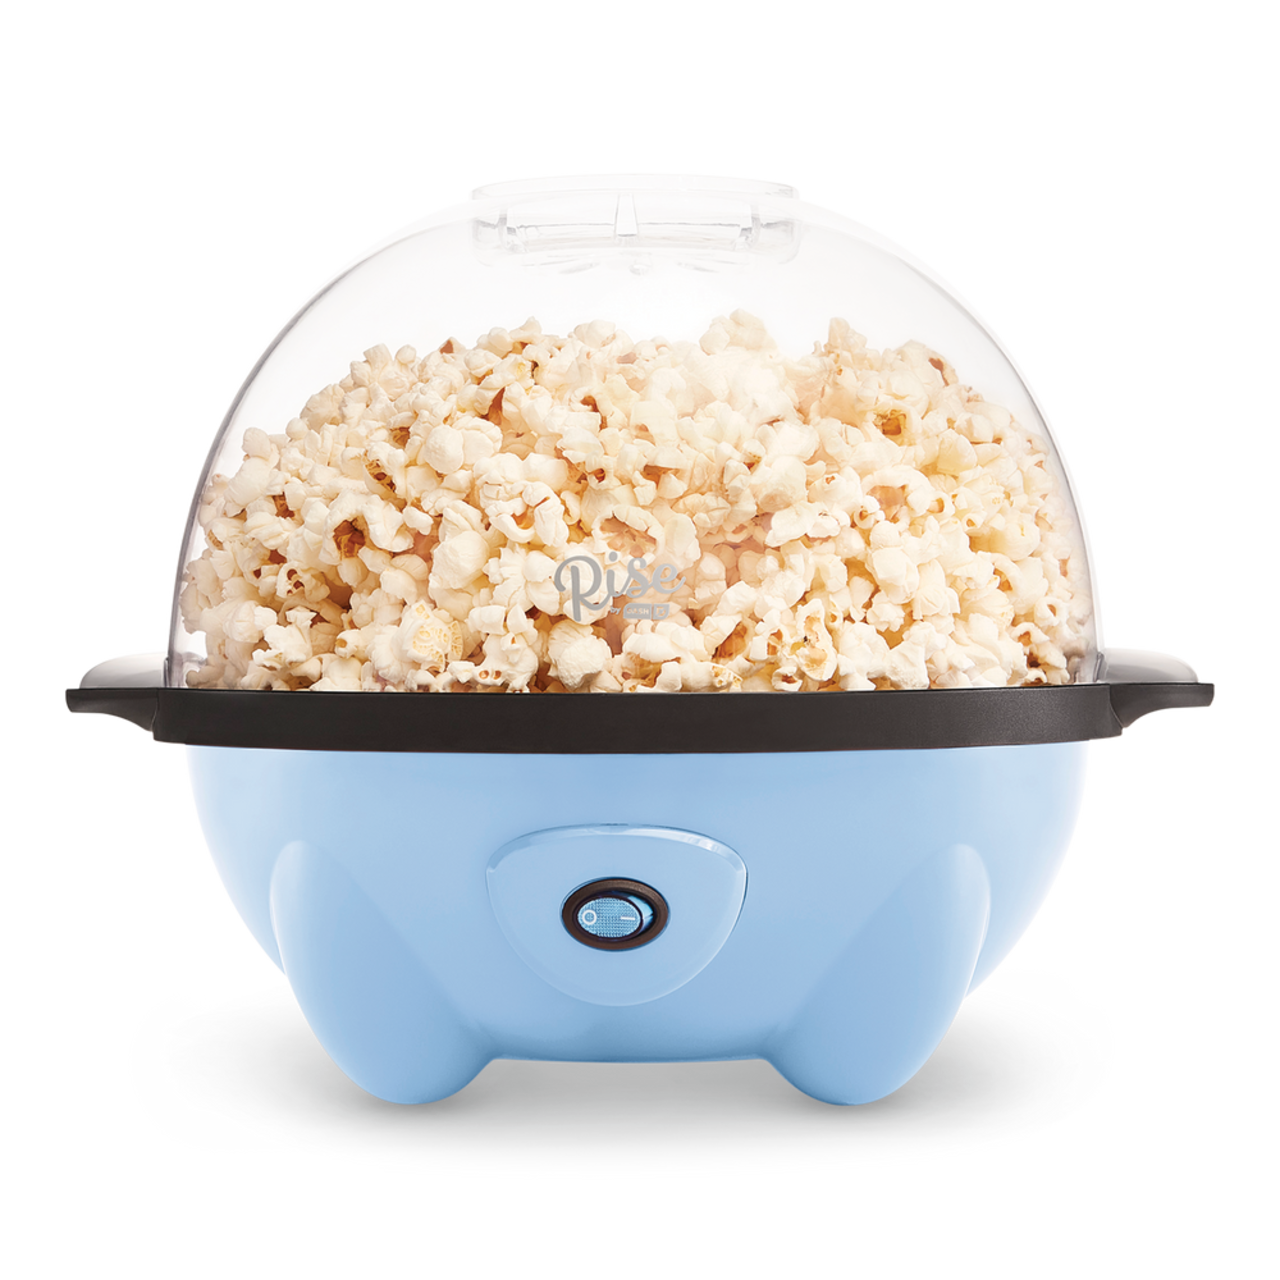 https://media-www.canadiantire.ca/product/living/kitchen/kitchen-appliances/0430150/dash-popcorn-maker-cf0153a1-cbf1-49d8-899d-e36c83eb5f21.png?imdensity=1&imwidth=640&impolicy=mZoom